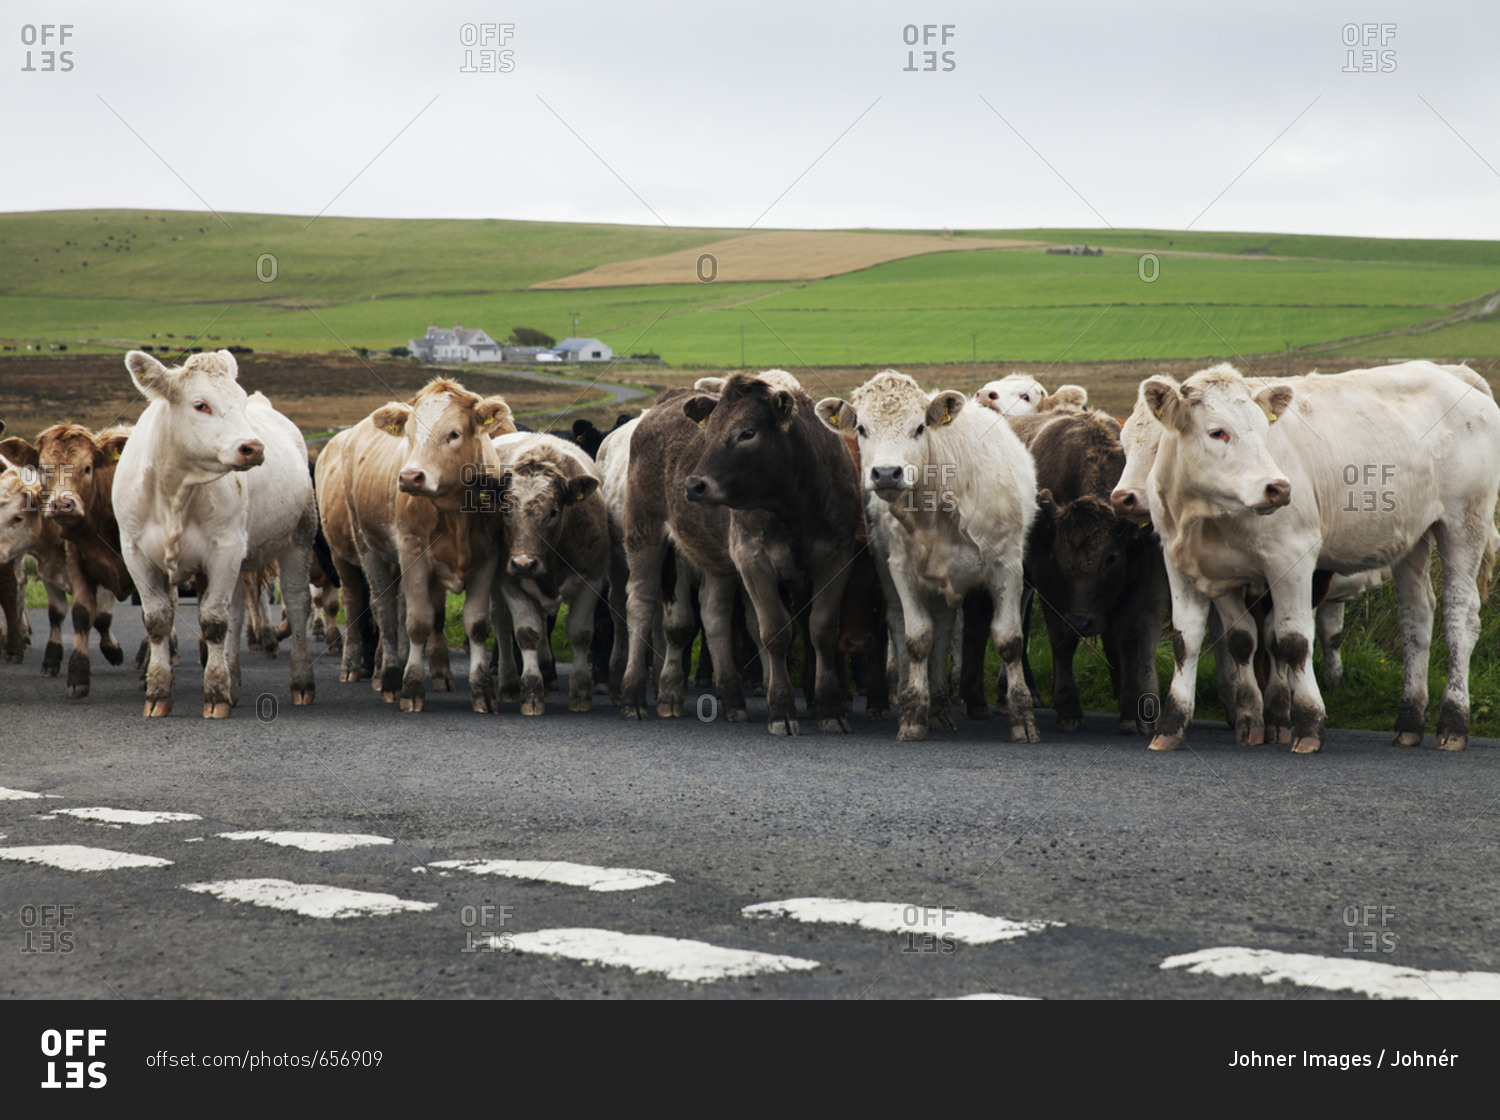 Cows on country road